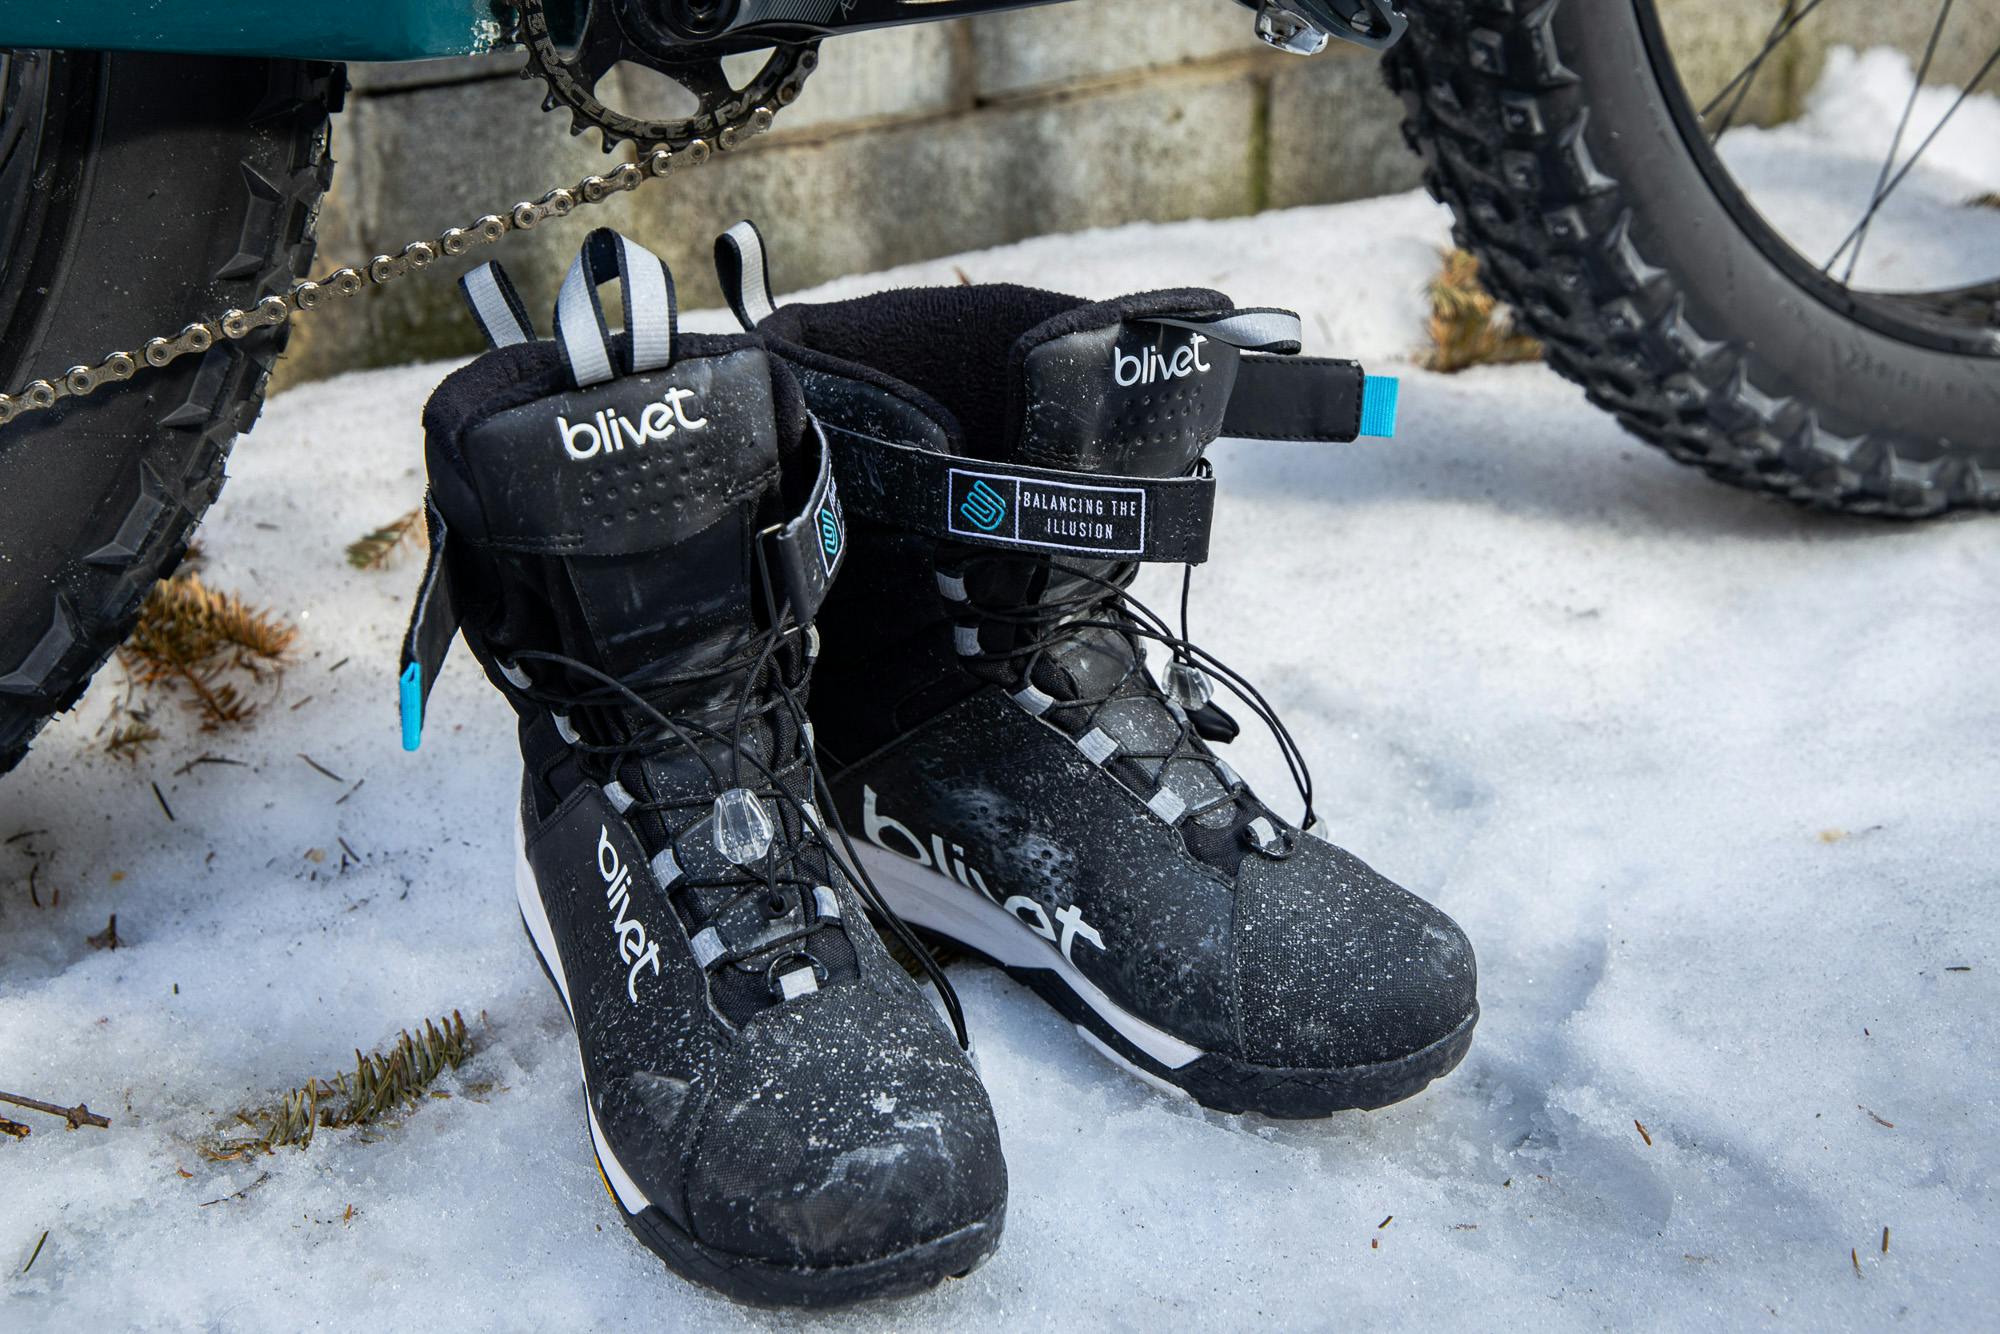 The Blivet Quilo boots after a ride.